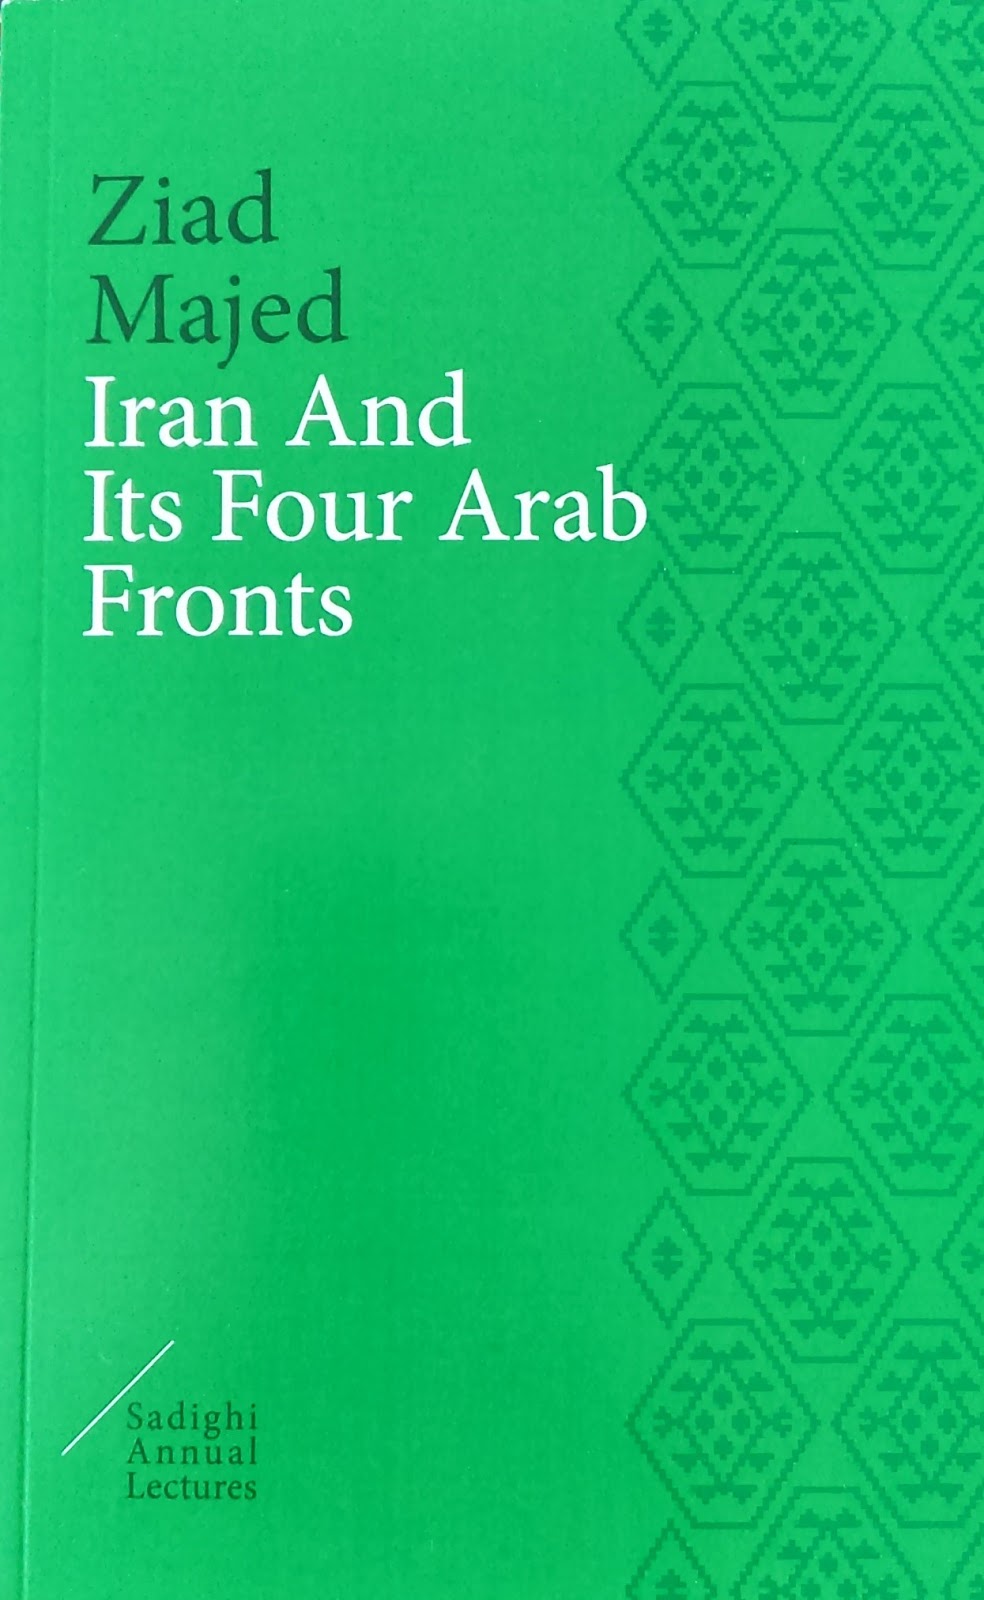 Iran and its four Arab fronts